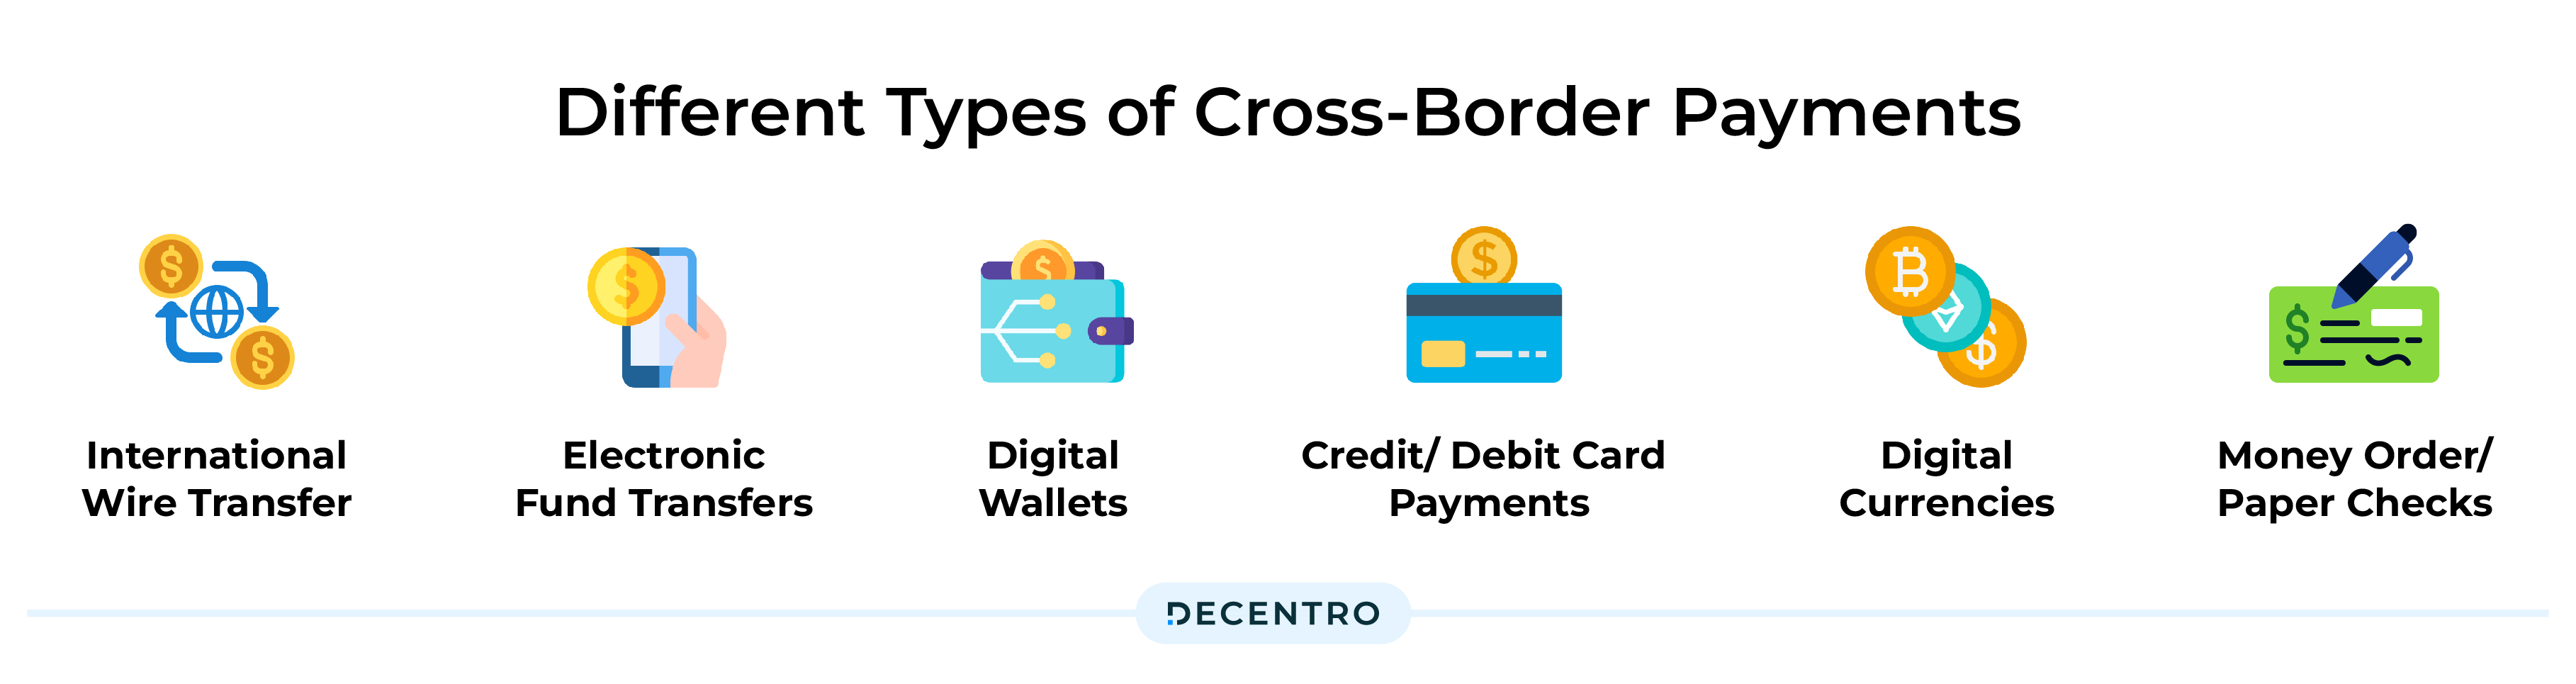 Types of Cross Border Payments